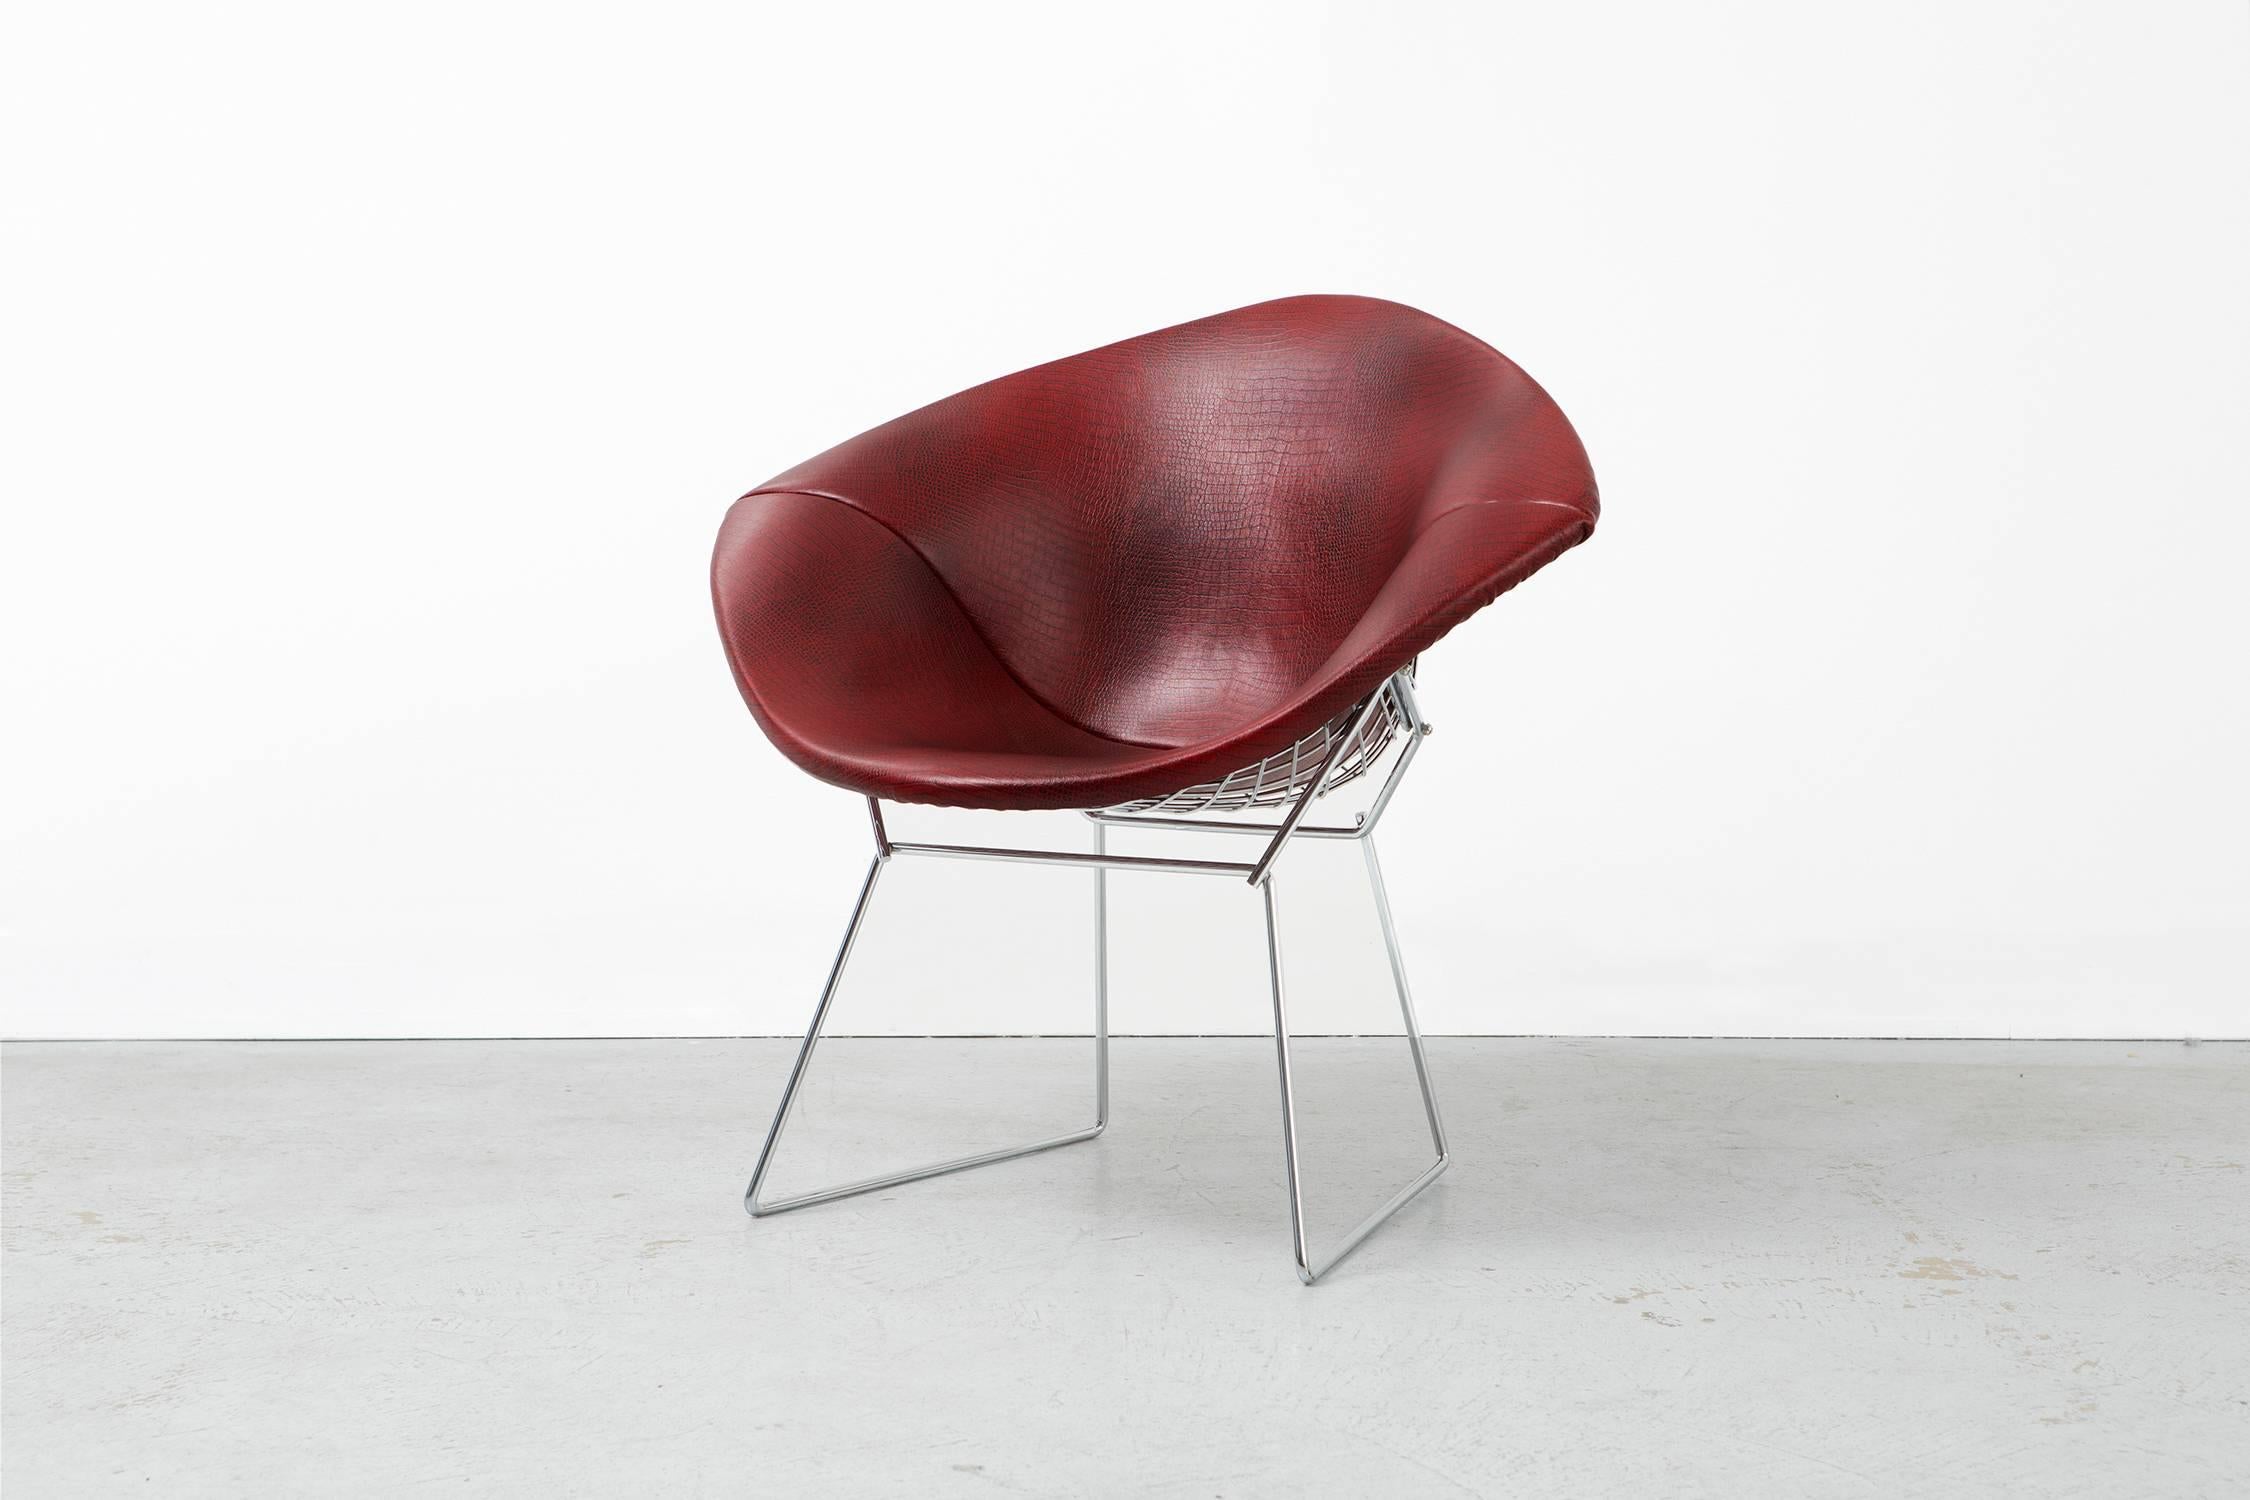 American Mid-Century Modern Knoll Diamond Bertoia Chair Reupholstered in Faux Leather For Sale